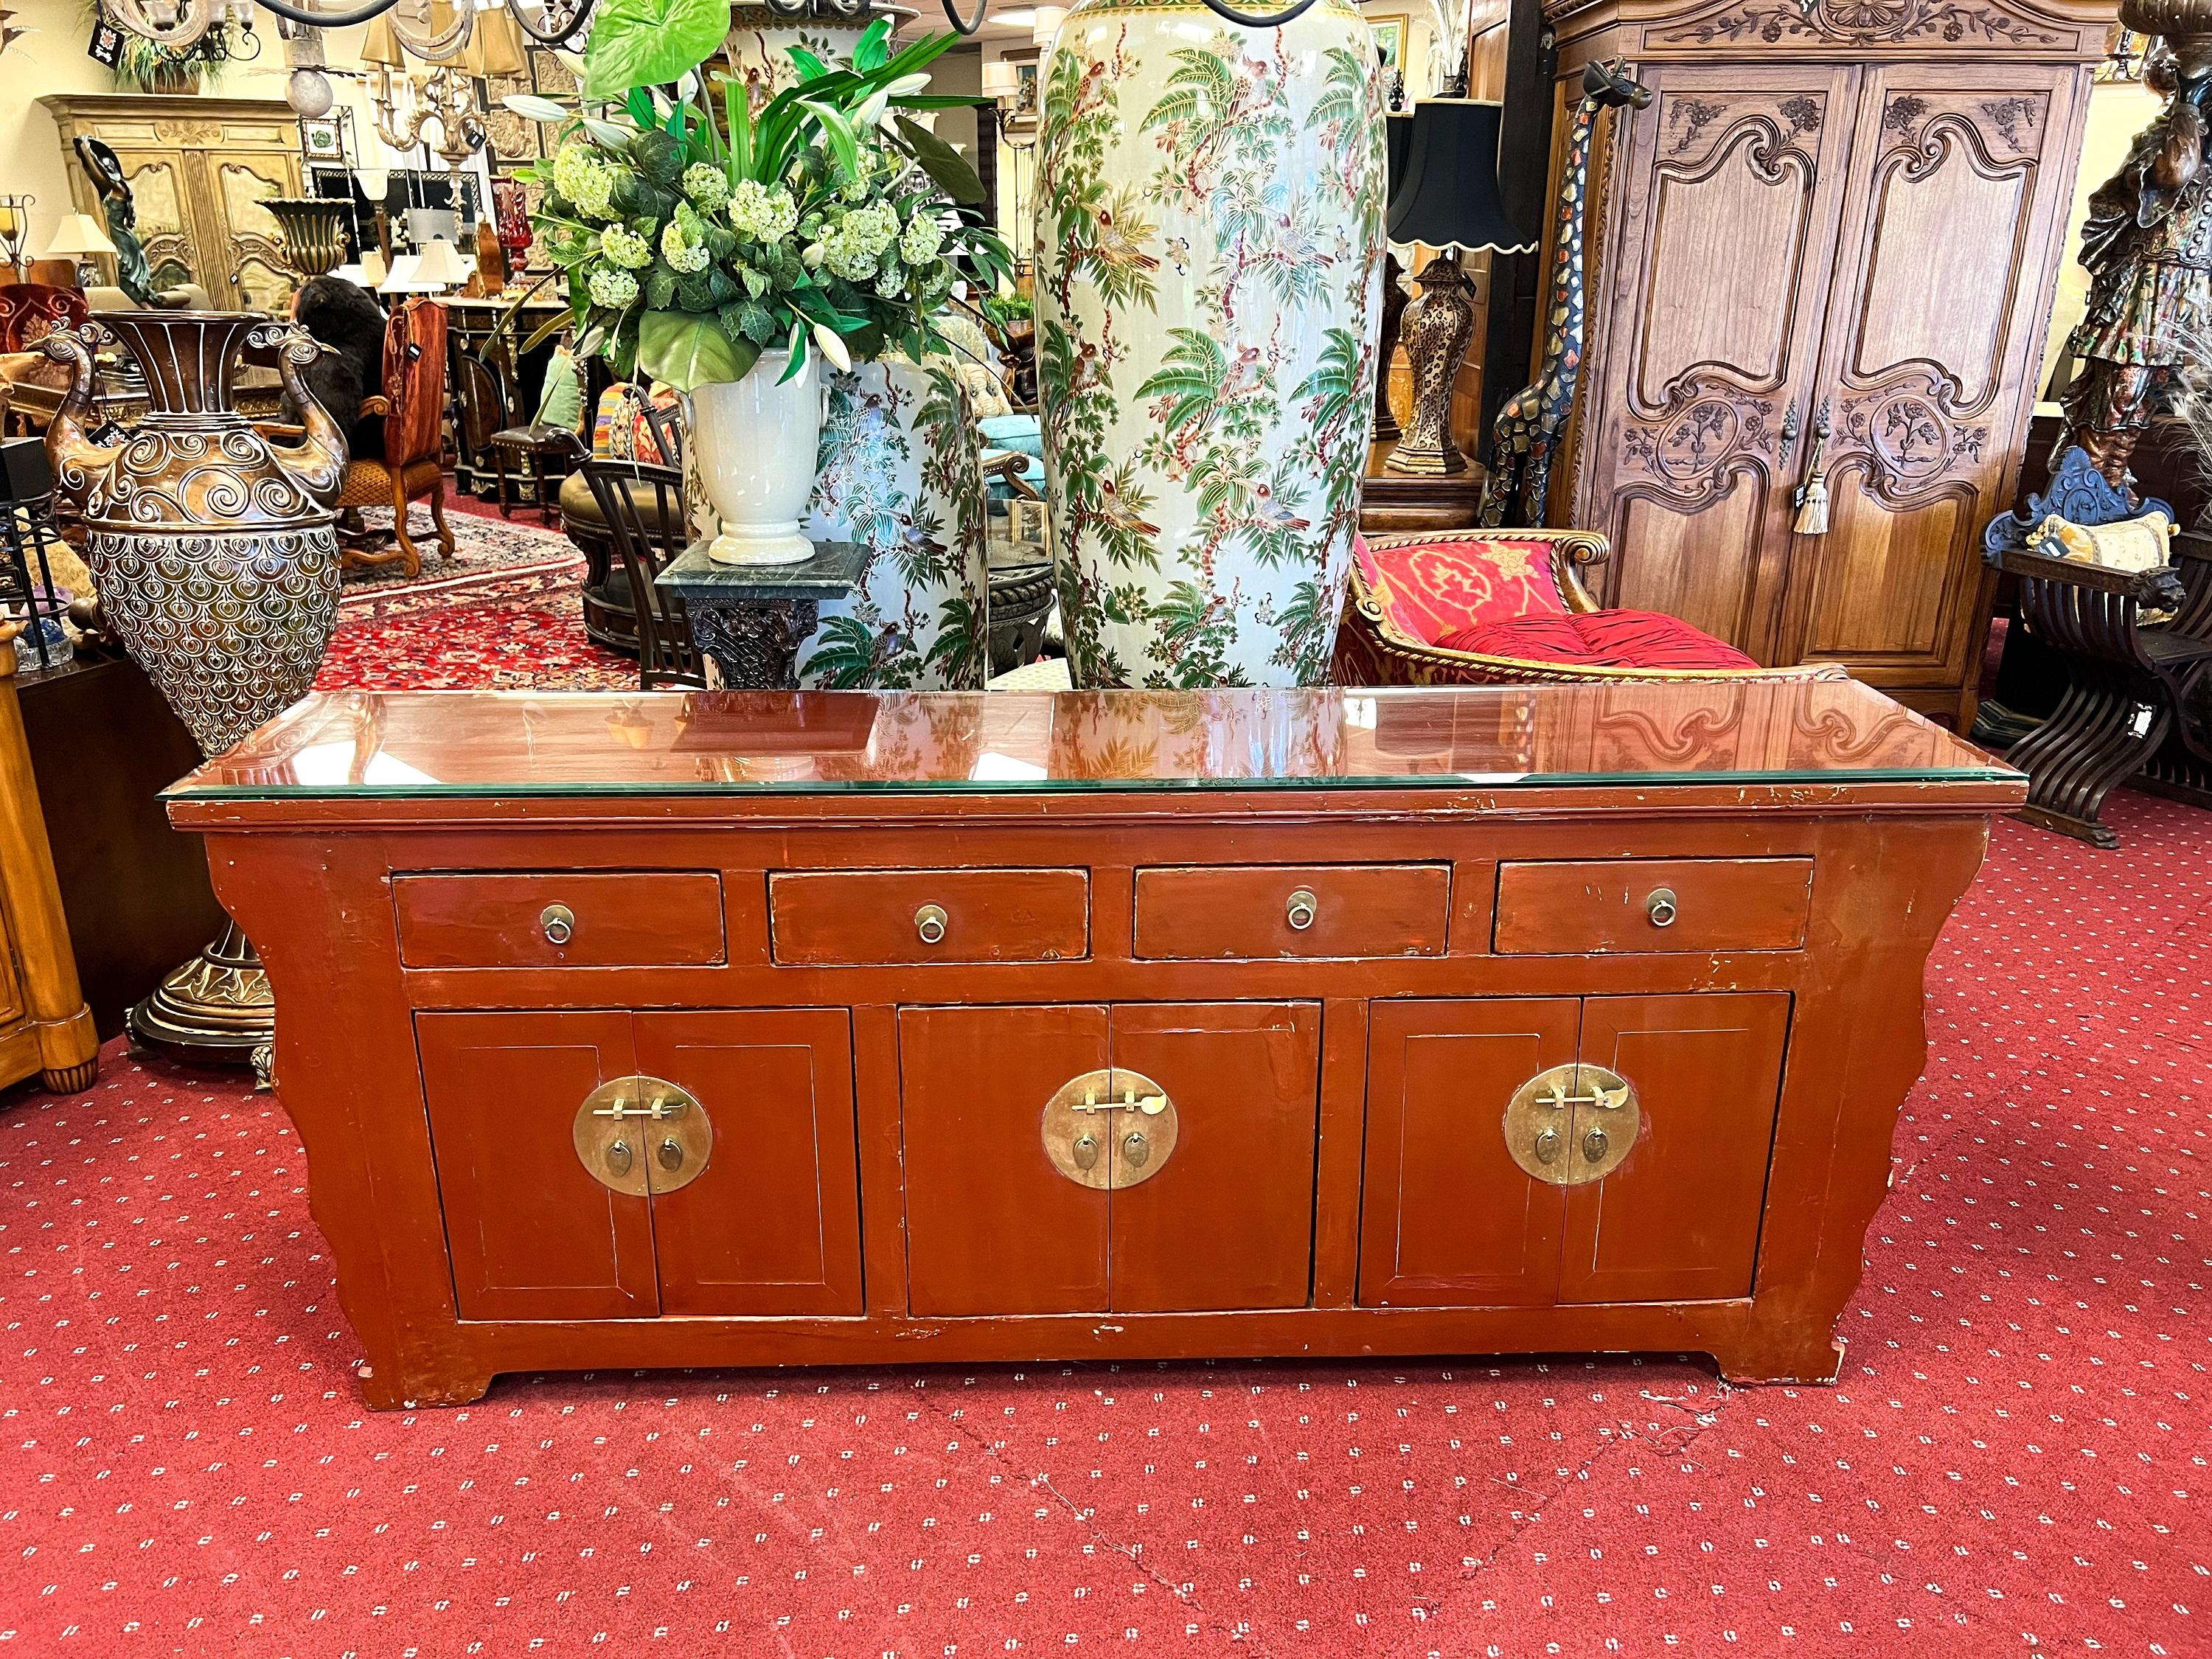 An Asian red lacquered credenza/sideboard that embodies elegance and functionality on a grand scale. This stunning piece of furniture is designed to make a statement in any space.

The red lacquer finish exudes a sense of richness and vibrancy,